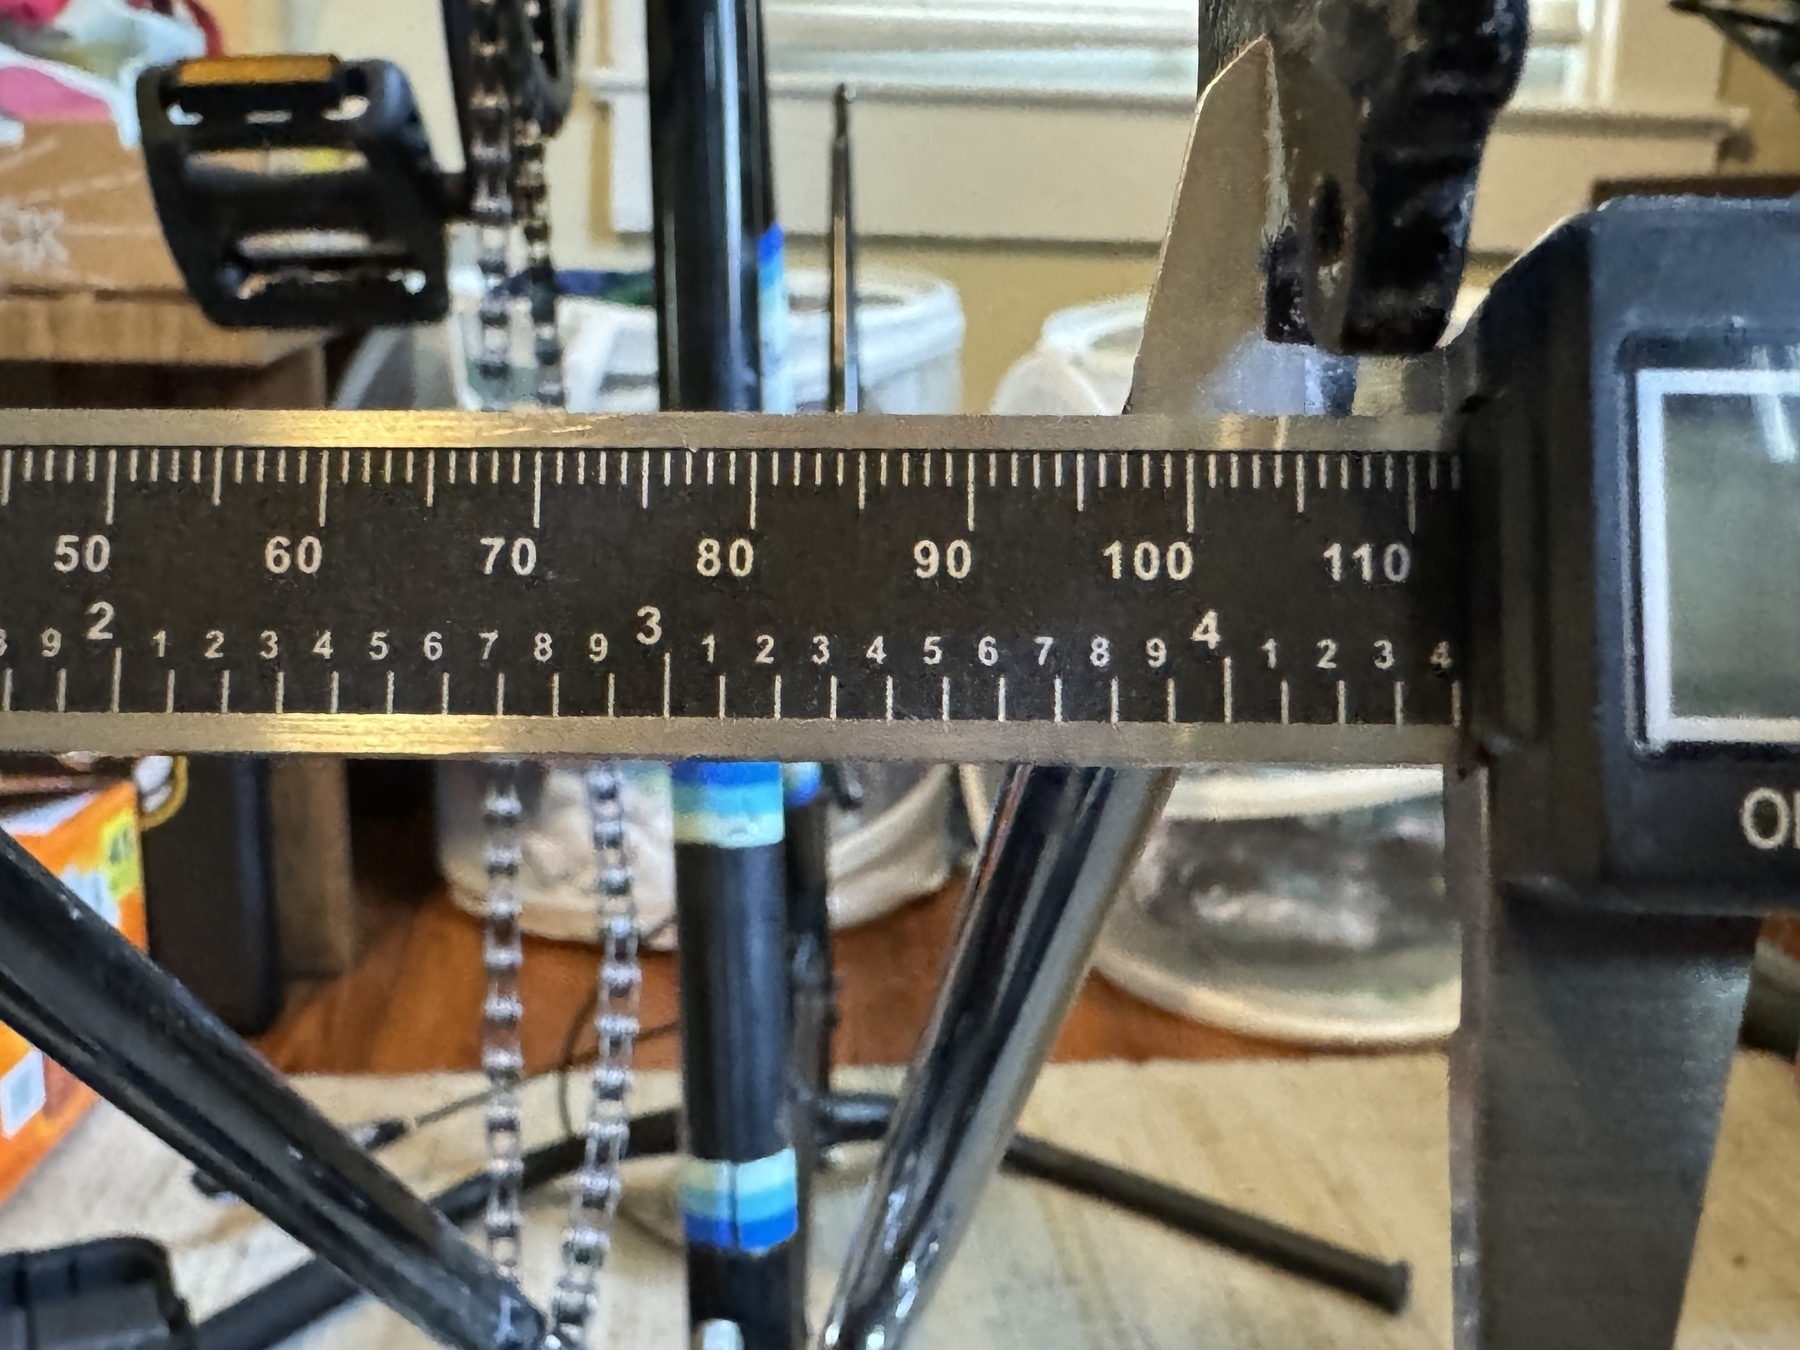 A set of calipers showing just over 110mm width between the rear dropouts of my Fairdale Coaster bike